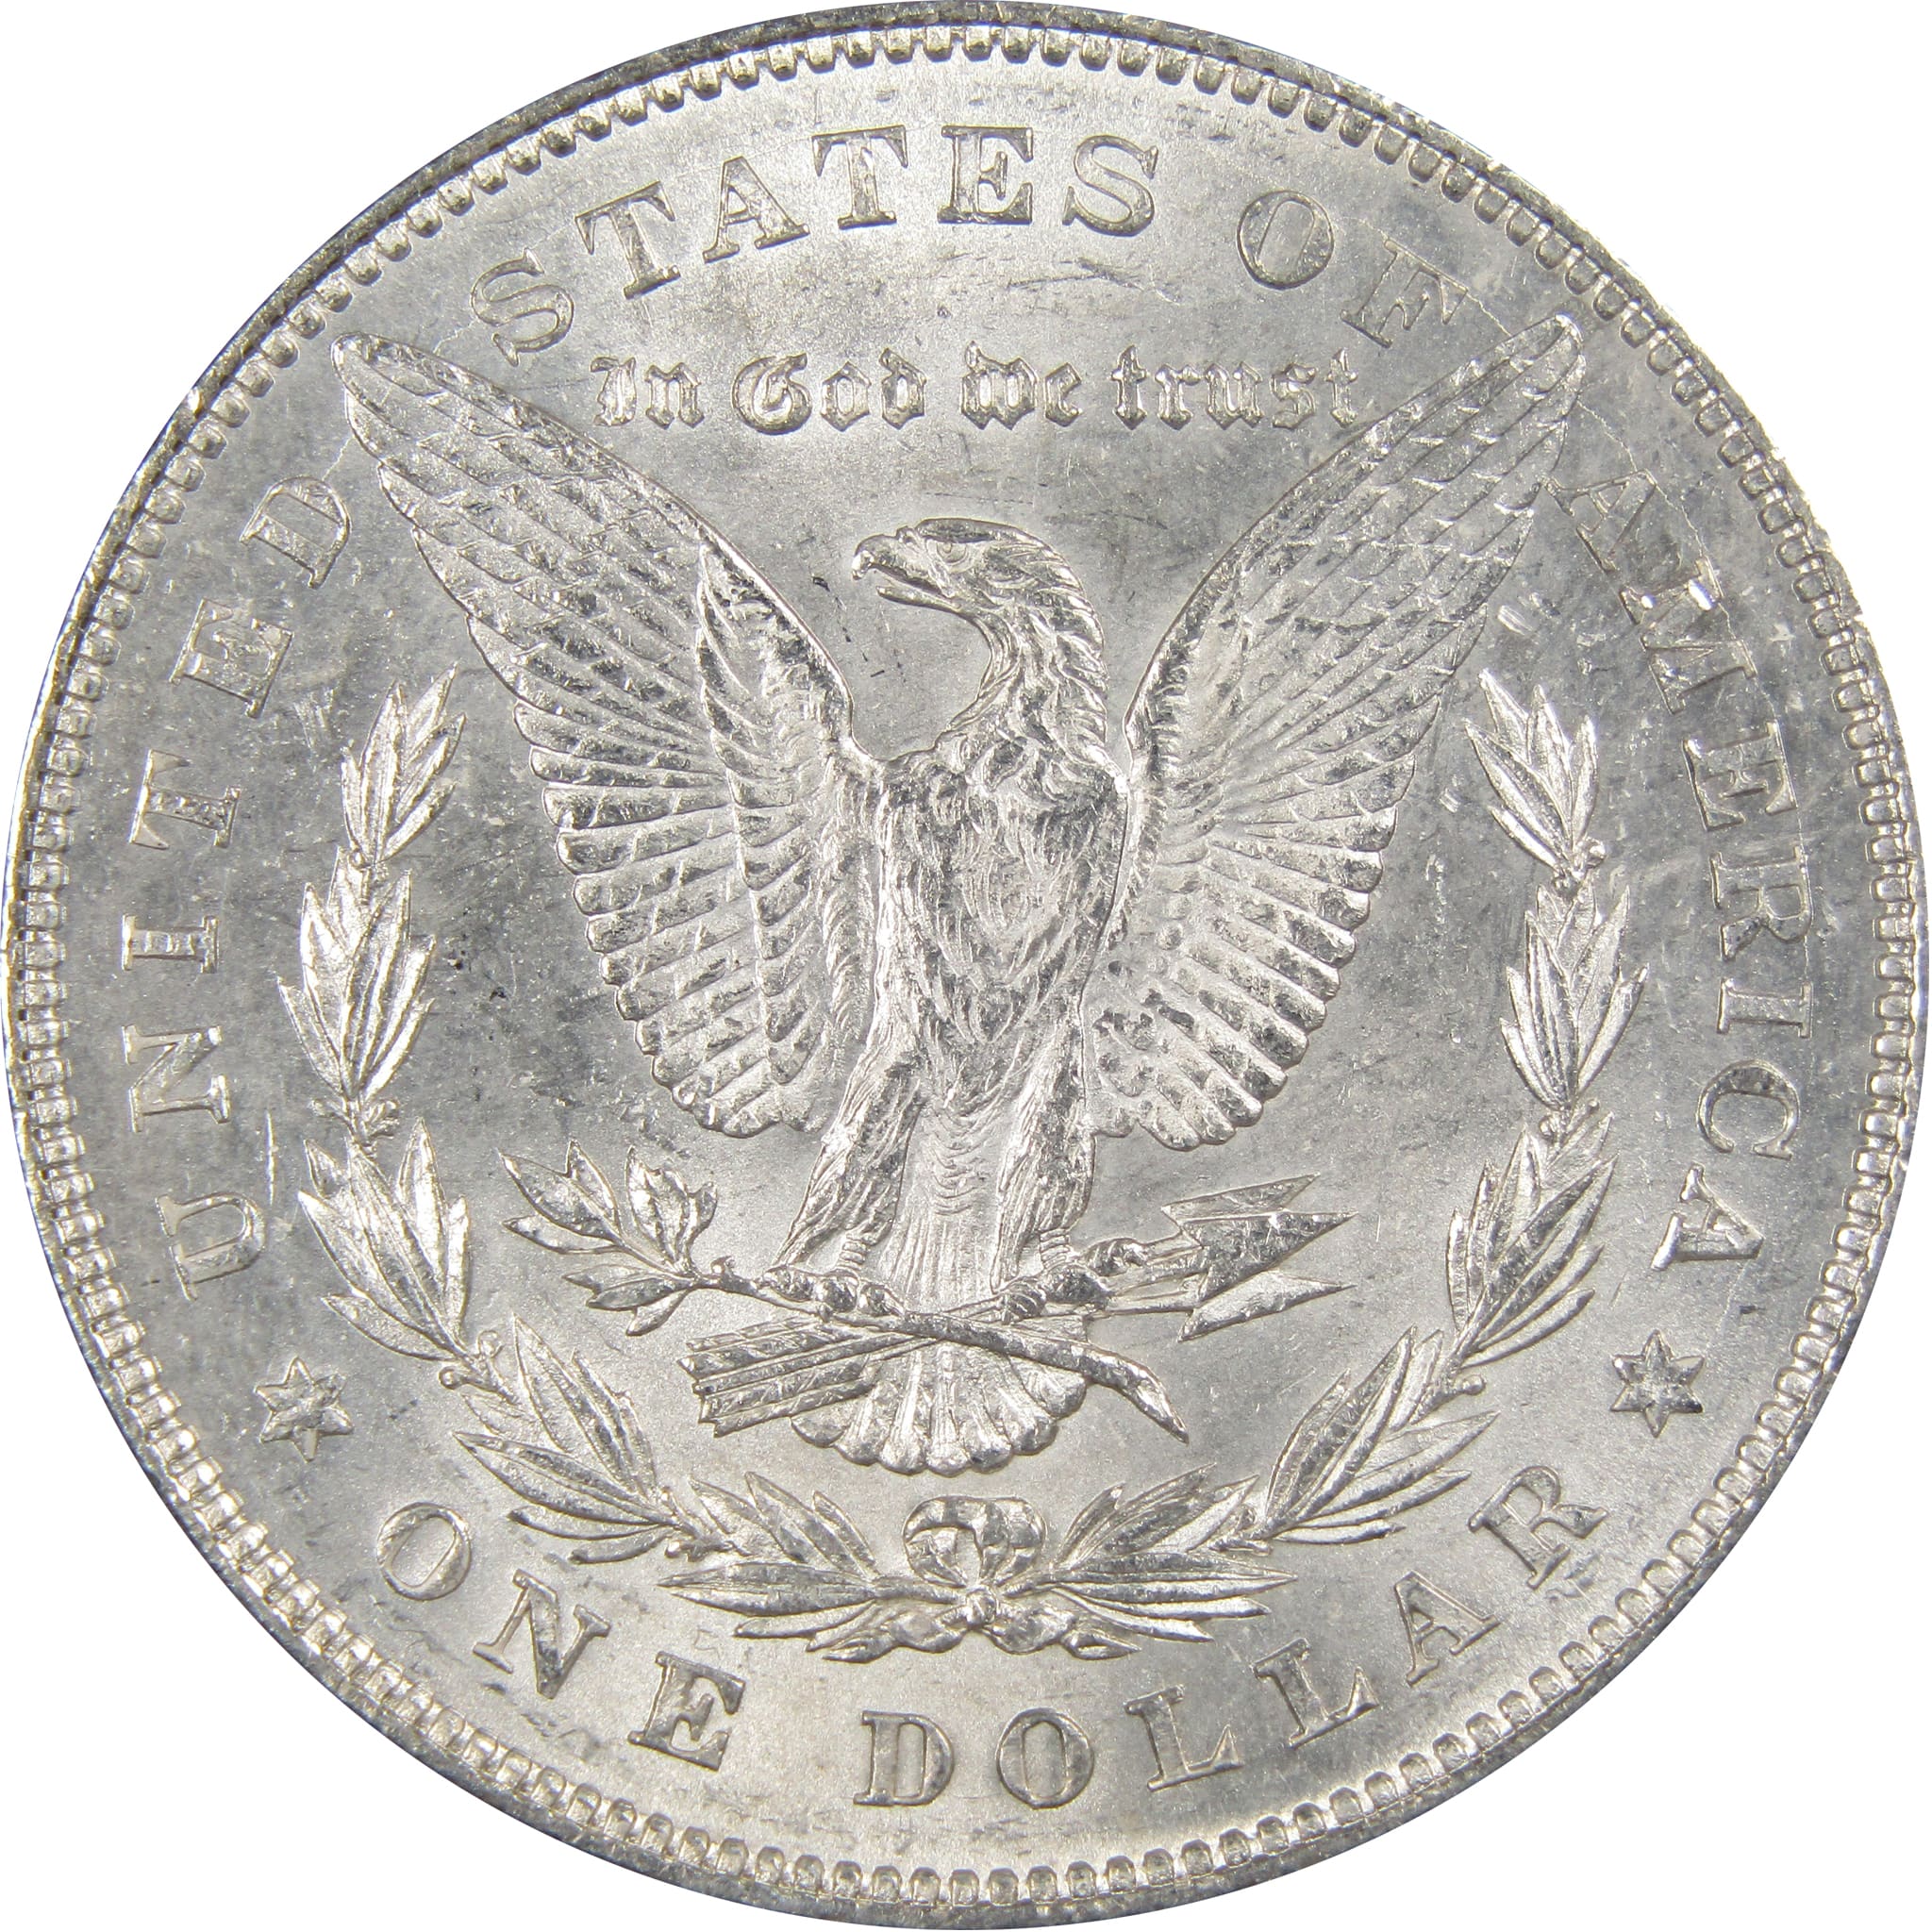 1878 7TF Rev 78 Morgan Dollar Choice About Uncirculated SKU:IPC7477 - Morgan coin - Morgan silver dollar - Morgan silver dollar for sale - Profile Coins &amp; Collectibles